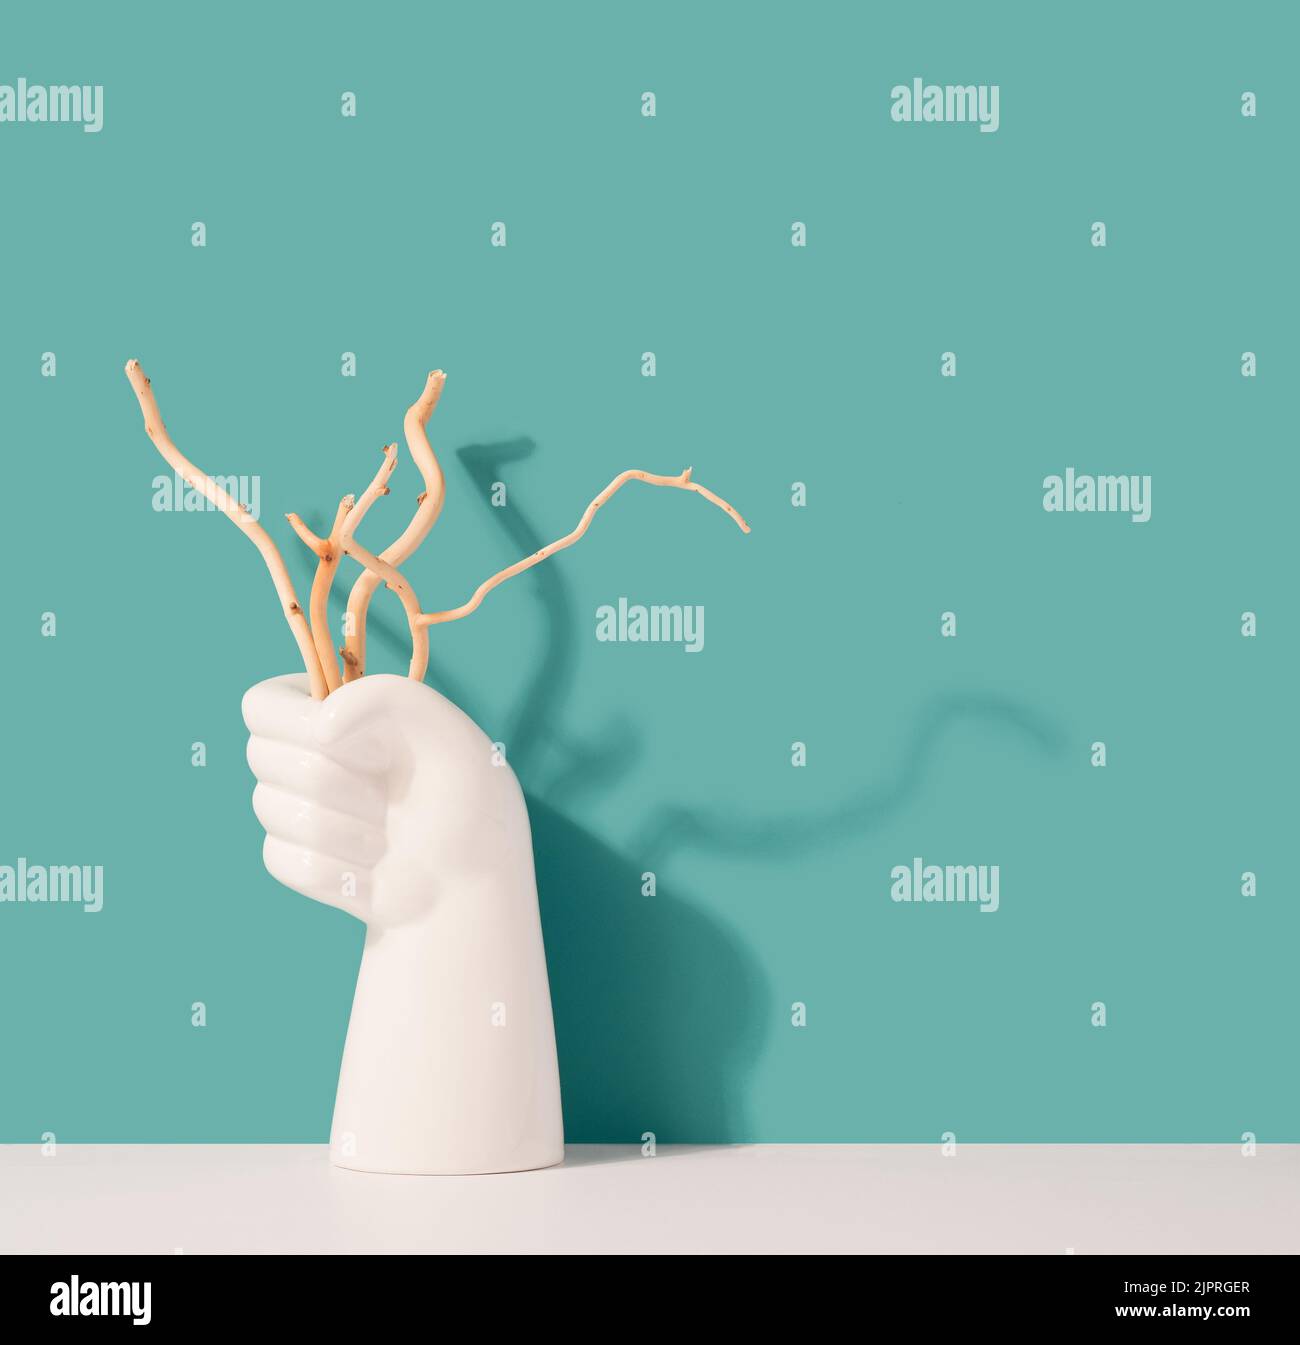 White fist holding dry branches against minty background. Environment, pollution minimal concept. Stock Photo